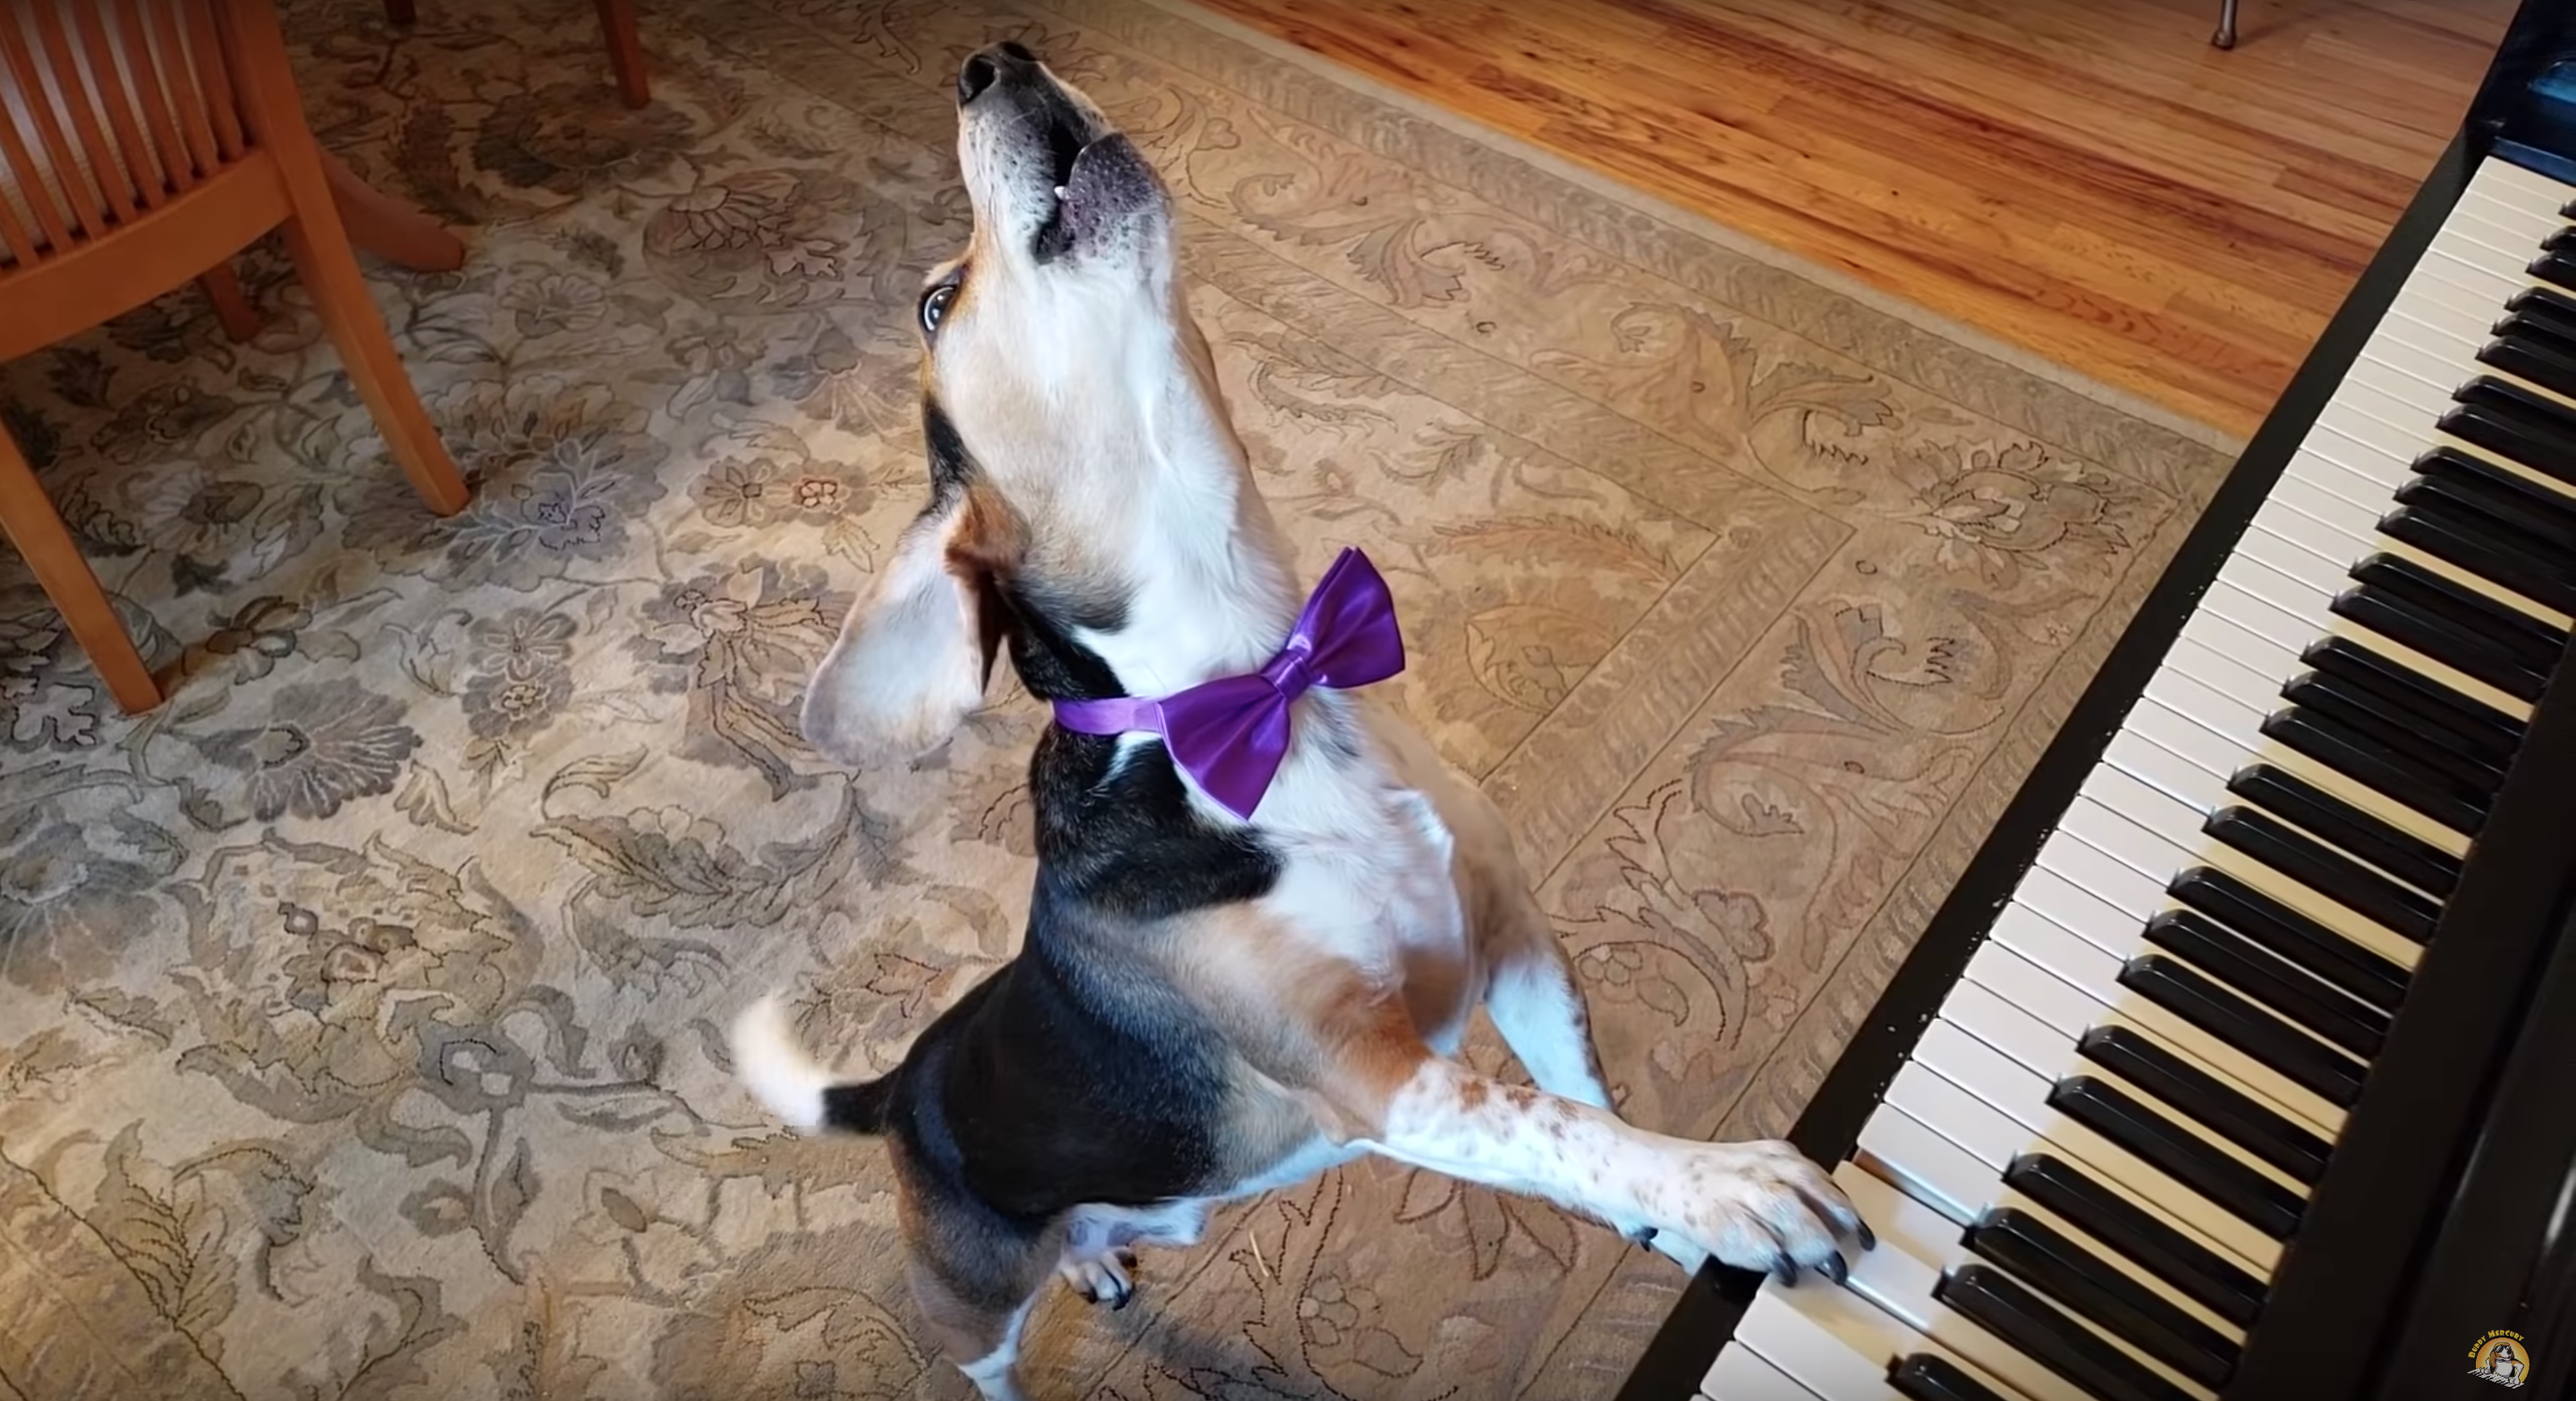 This Dog Wears Bowties And Plays Piano. We, Frankly, Are Not Worthy